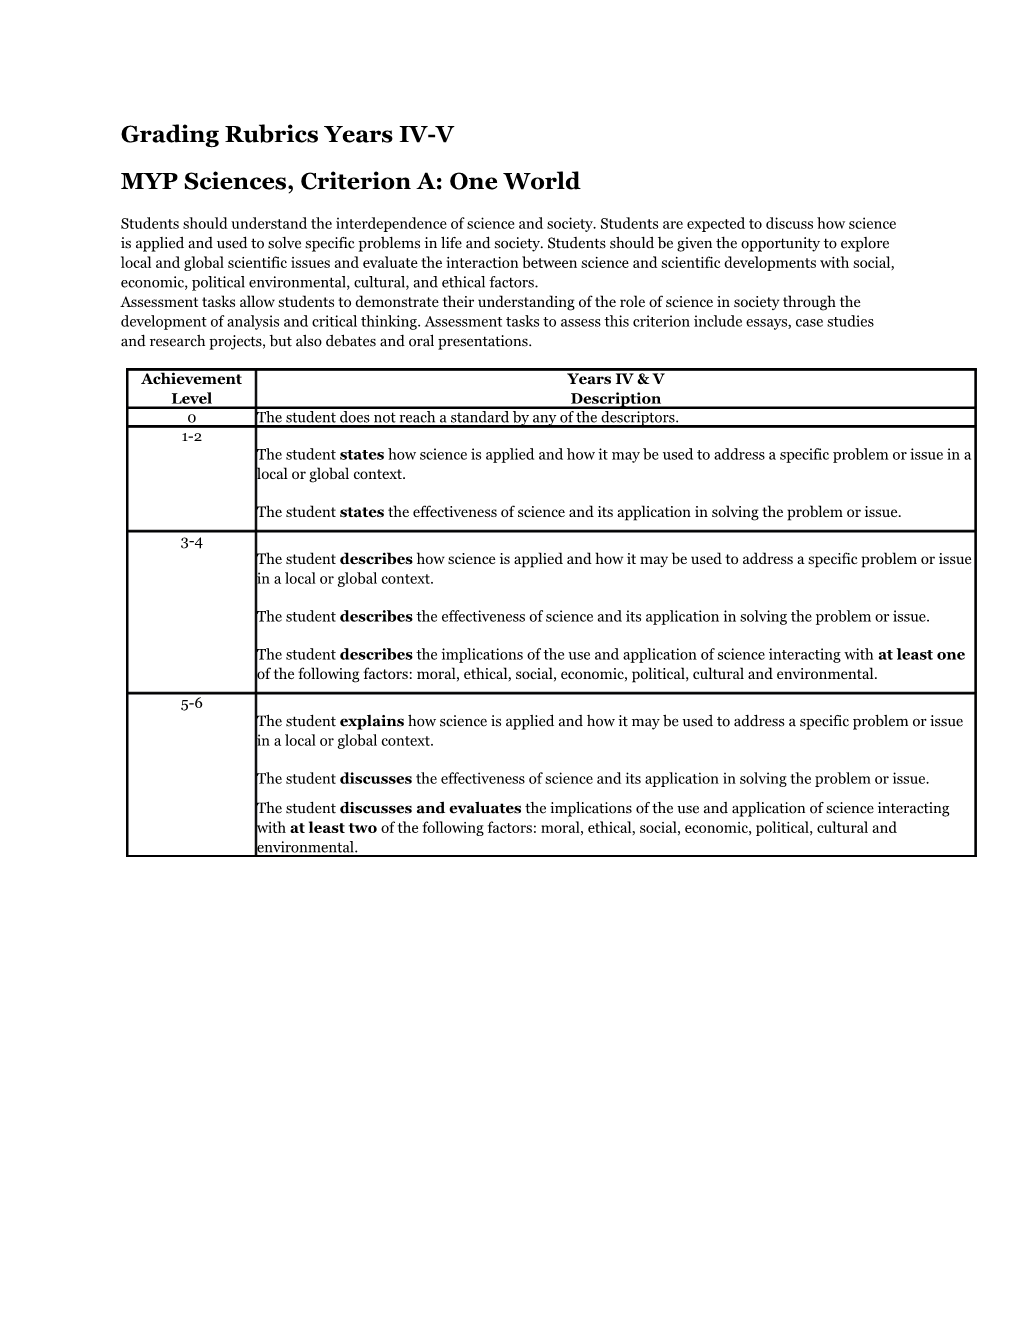 MYP Sciences, Criterion A: One World